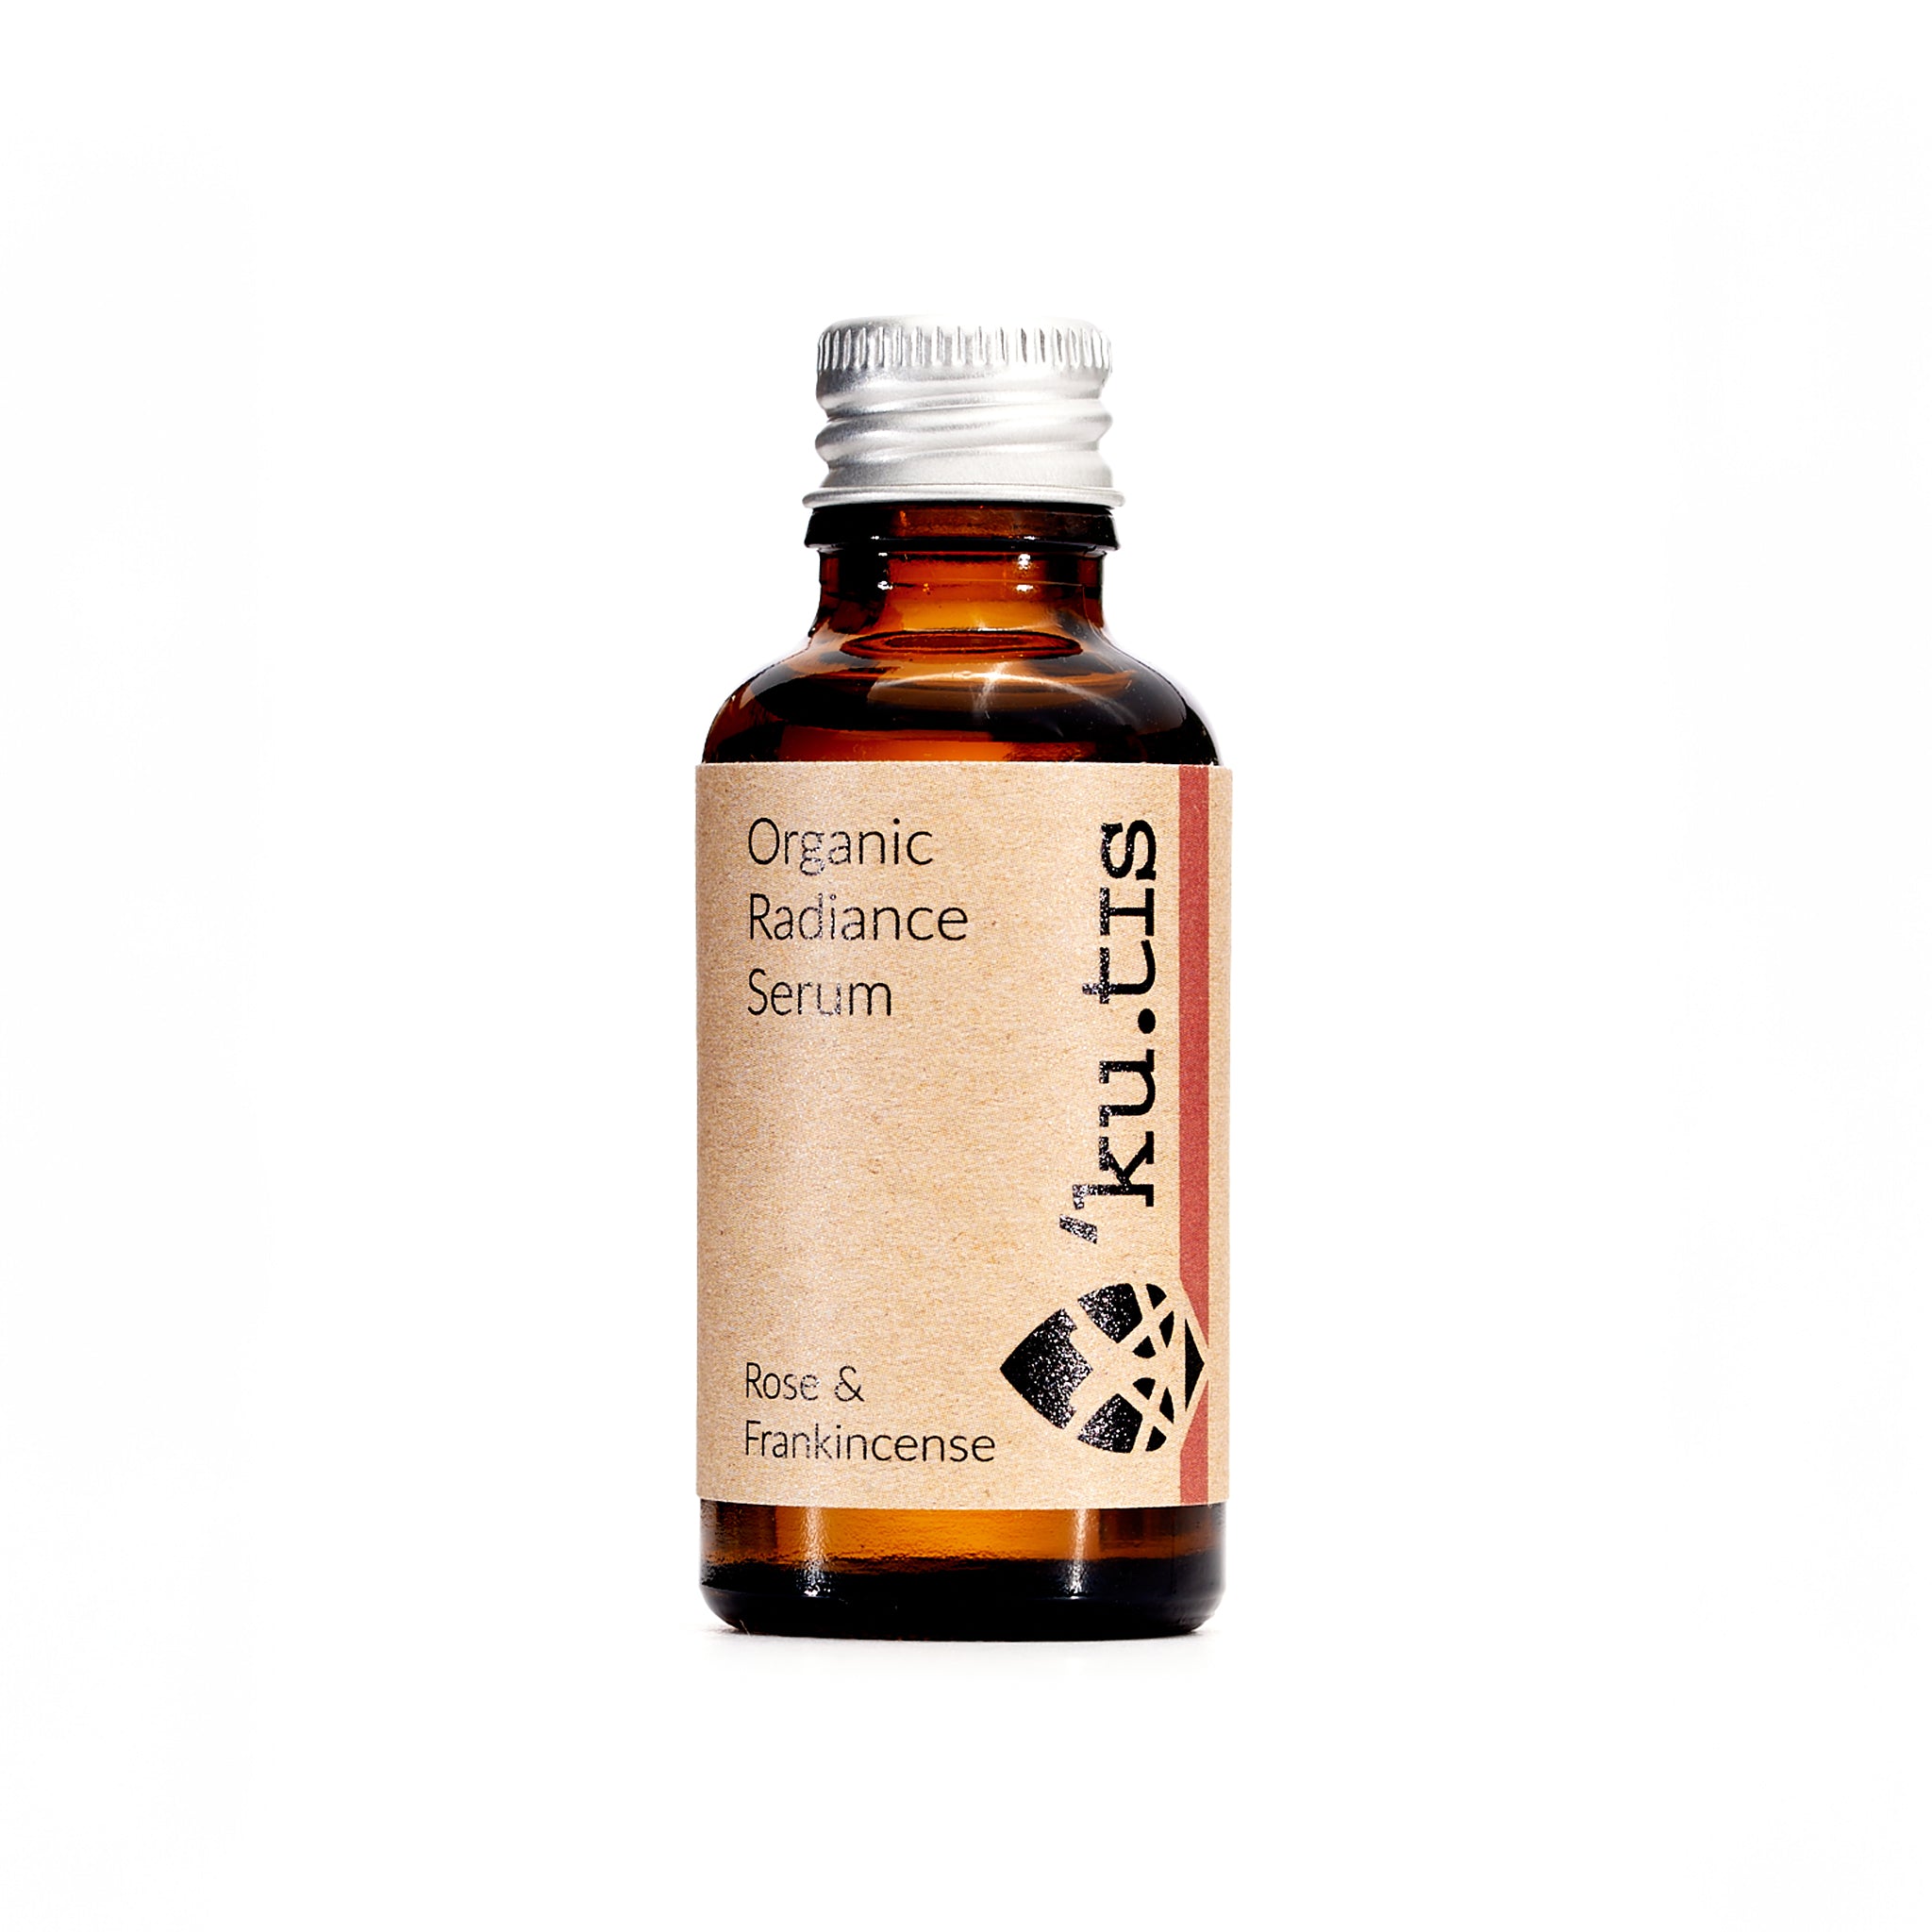 Natural organic radiance rose and frankinscense face oil serum in a glass bottle with aluminium cap